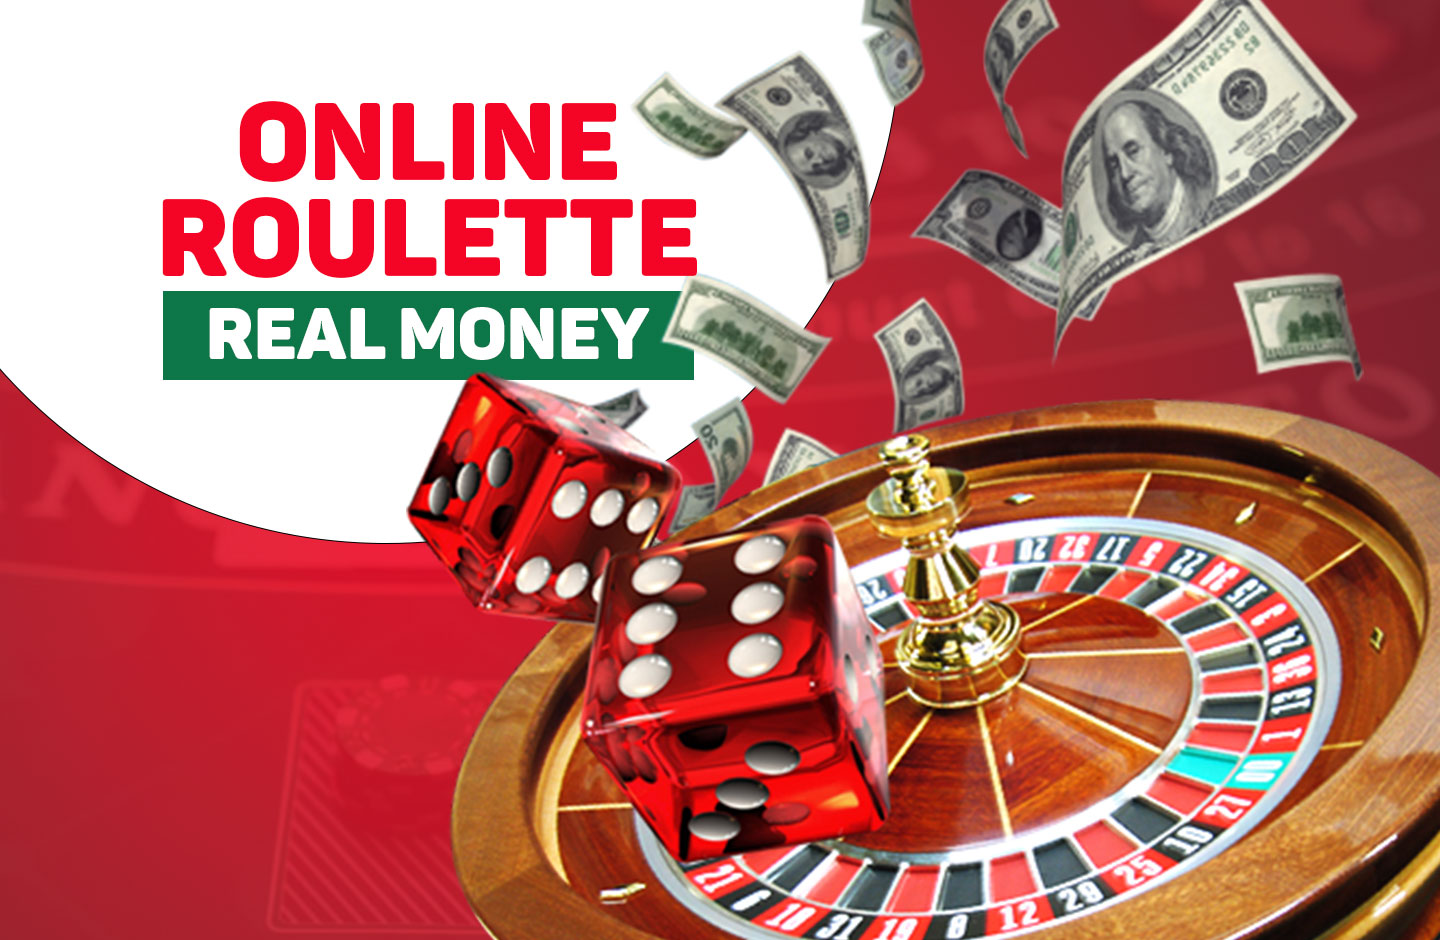 Poll: How Much Do You Earn From online casino easy cash out?